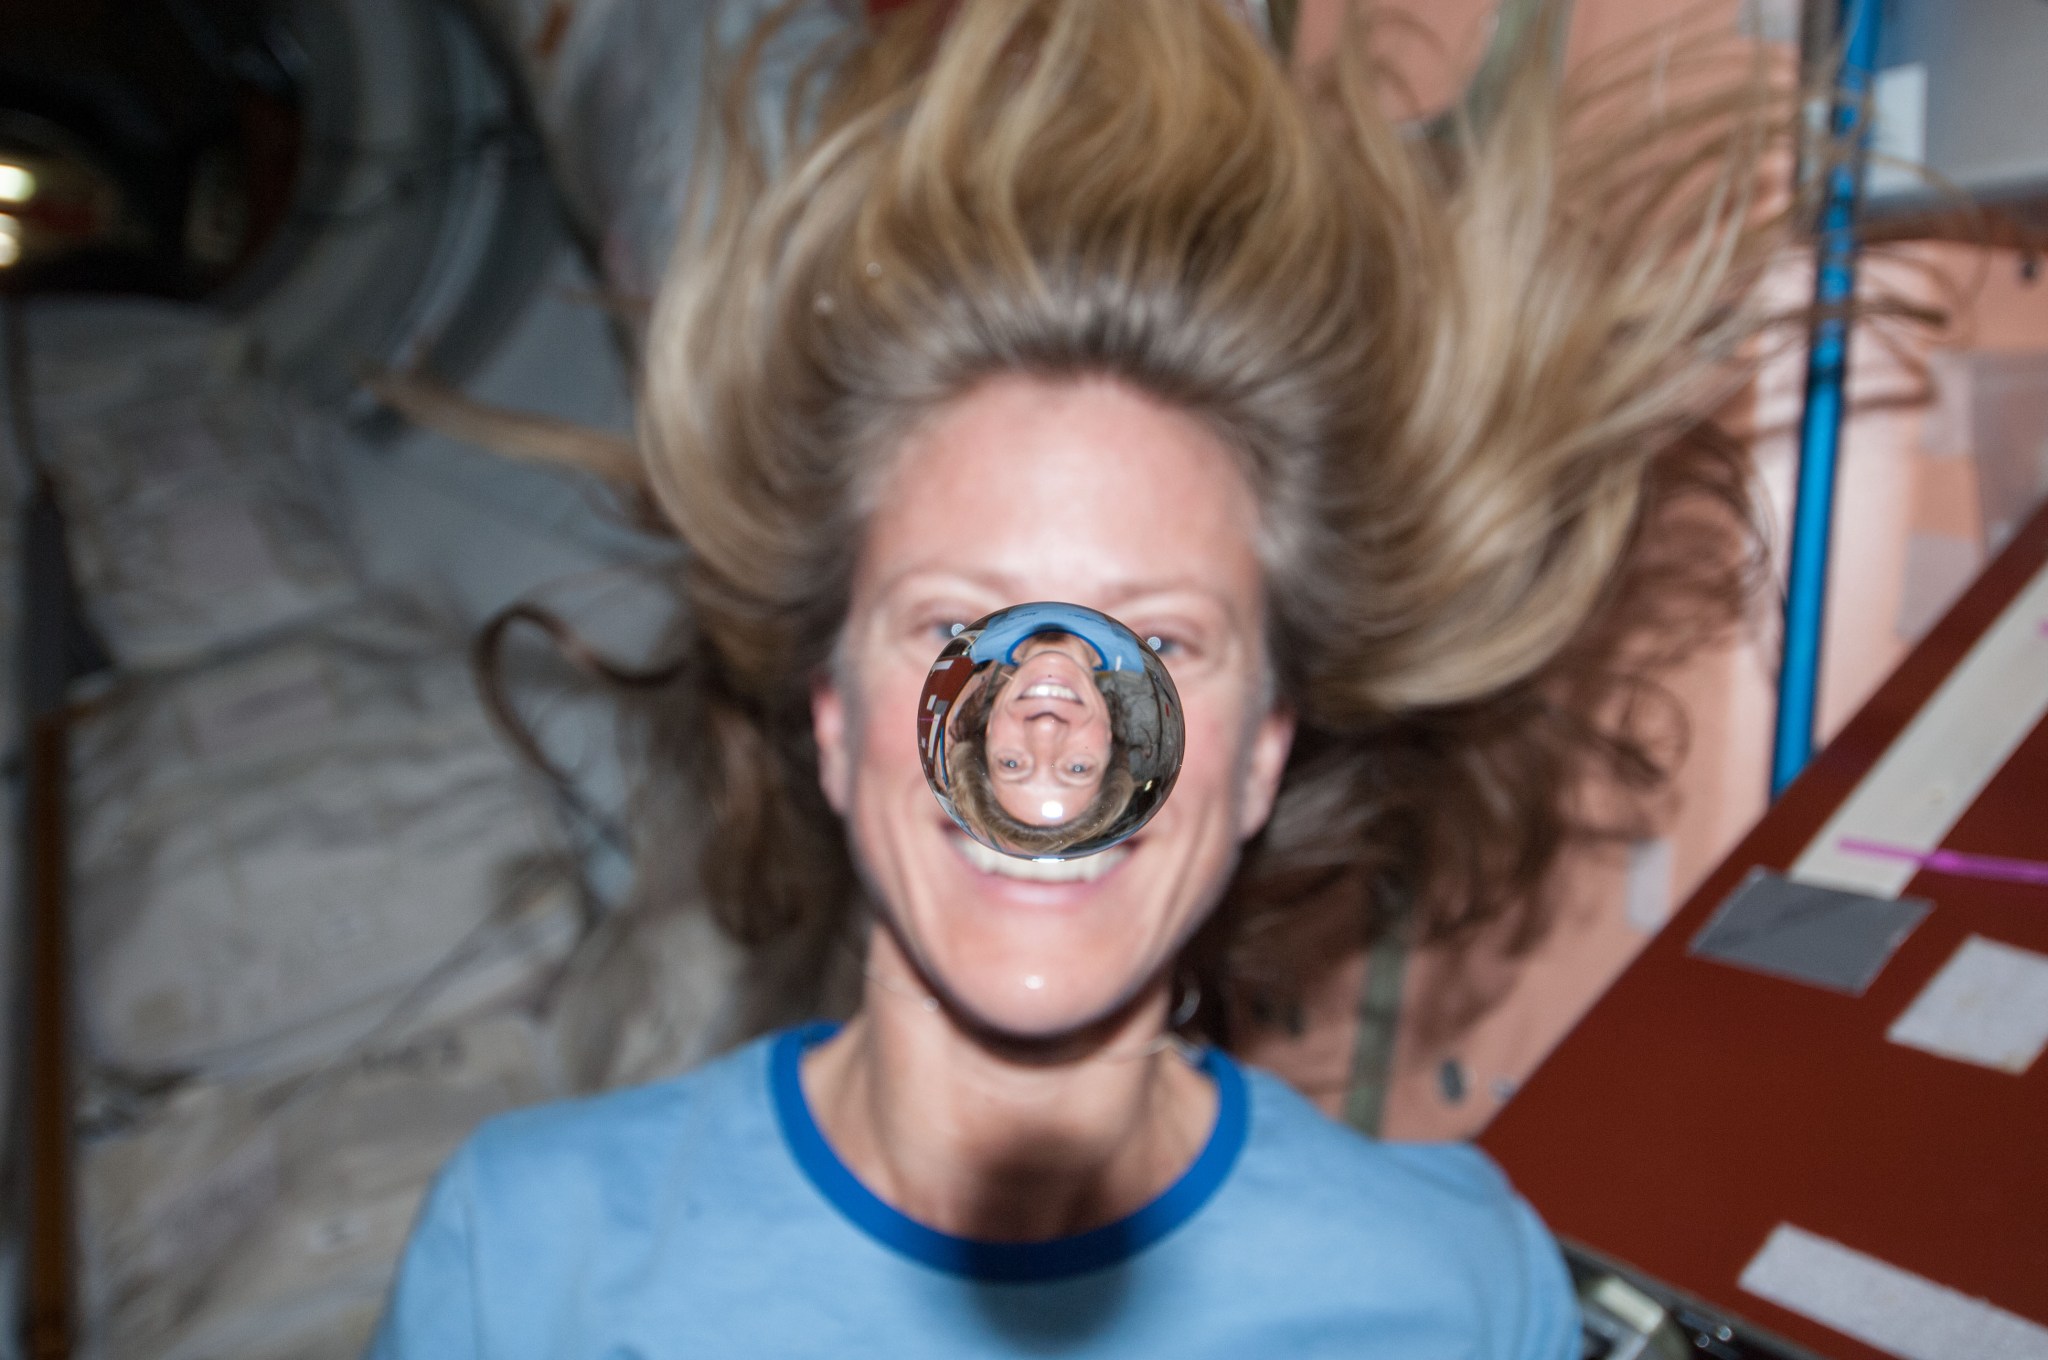 NASA astronaut Karen Nyberg watches a water bubble float freely between her and the camera.